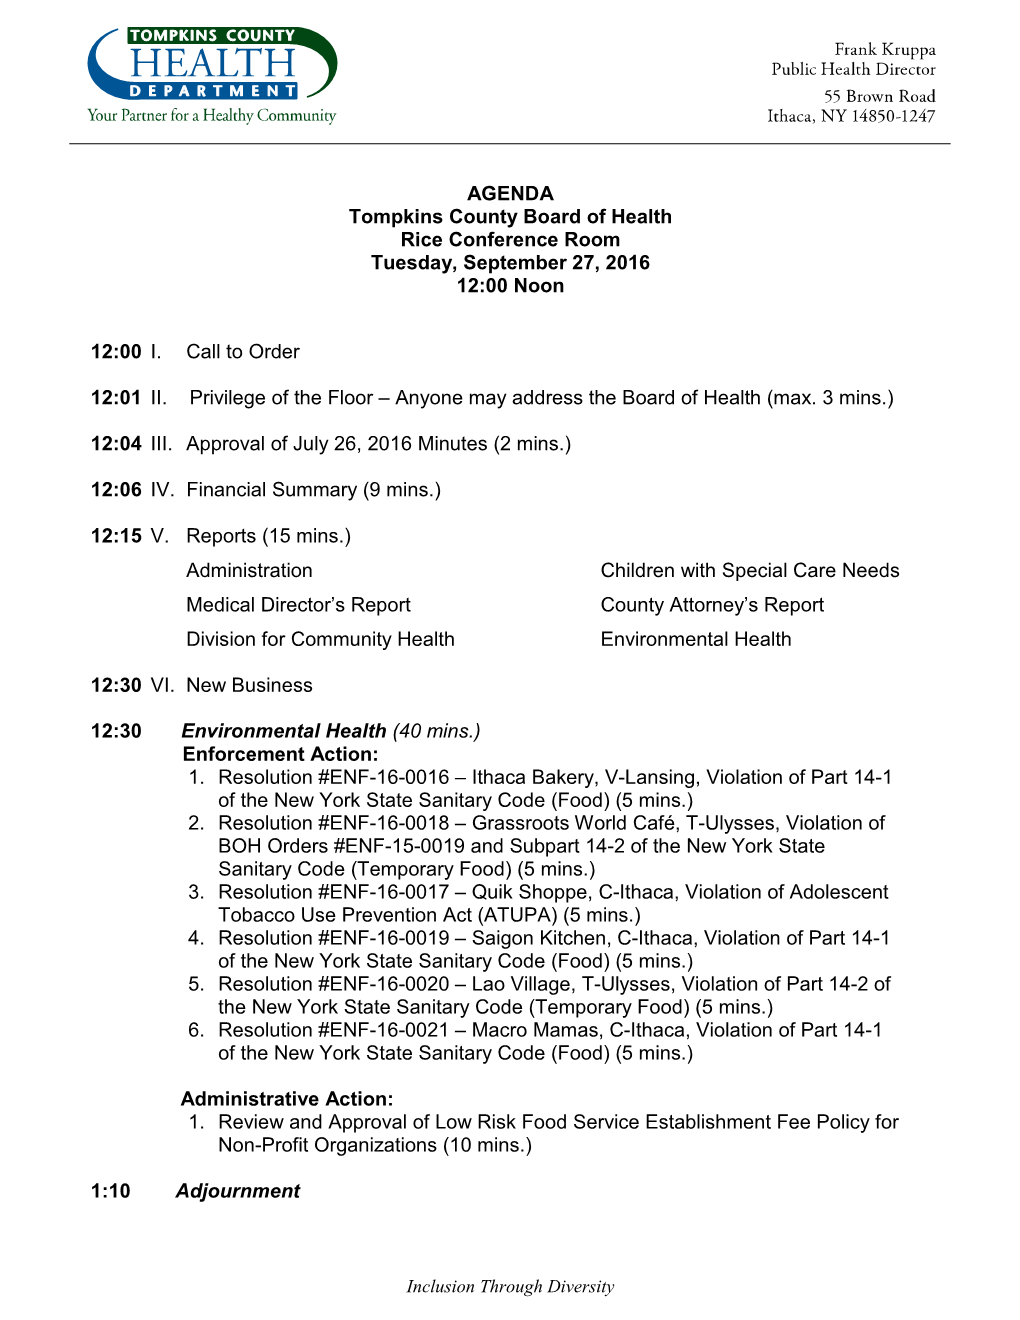 AGENDA Tompkins County Board of Health Rice Conference Room Tuesday, September 27, 2016 12:00 Noon